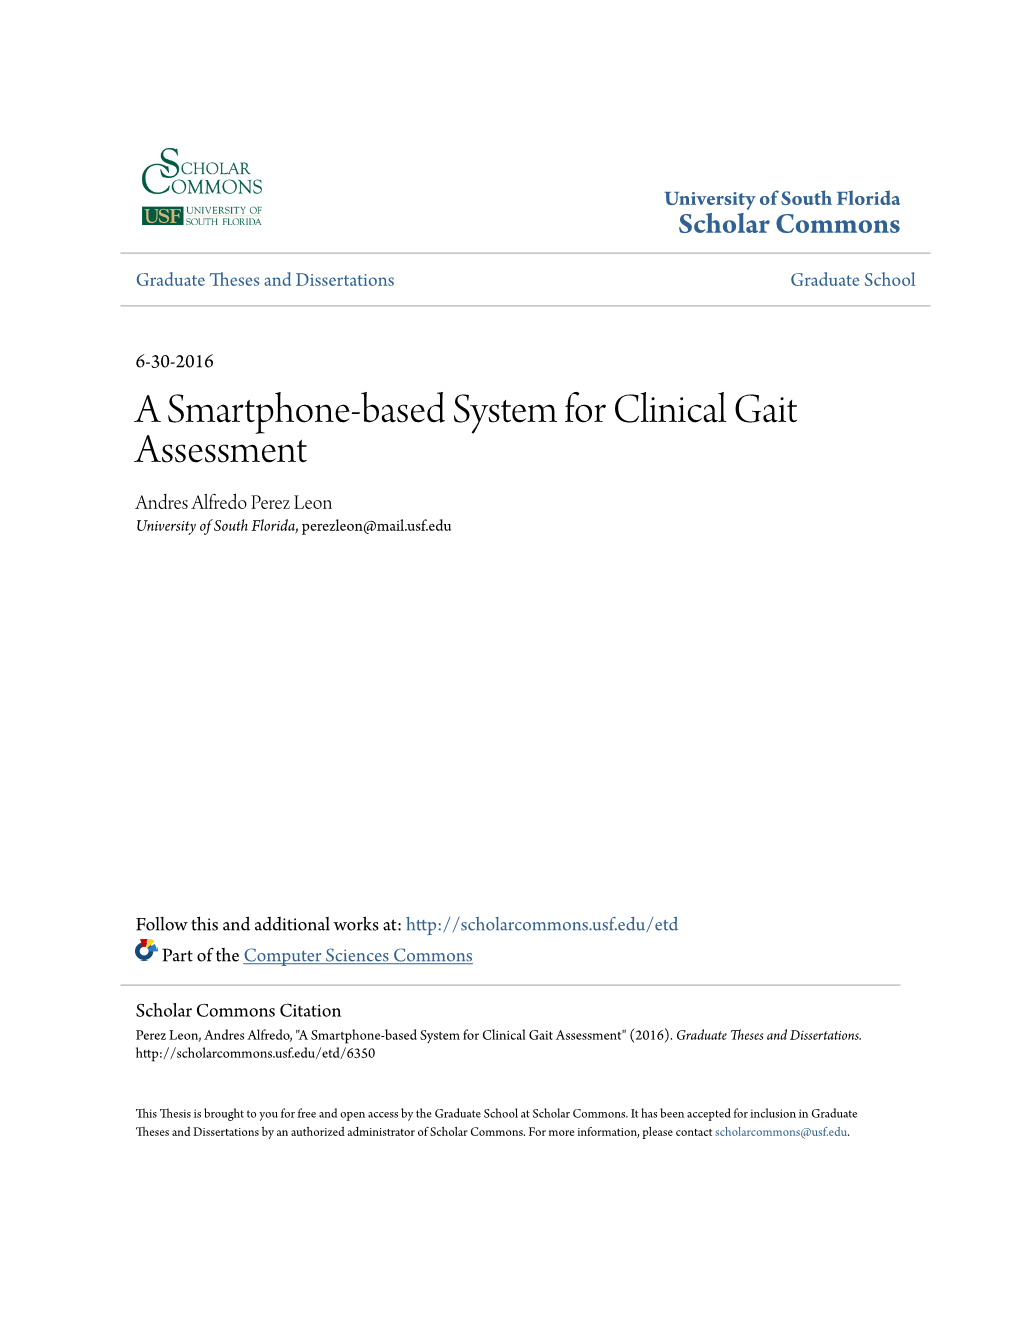 A Smartphone-Based System for Clinical Gait Assessment Andres Alfredo Perez Leon University of South Florida, Perezleon@Mail.Usf.Edu